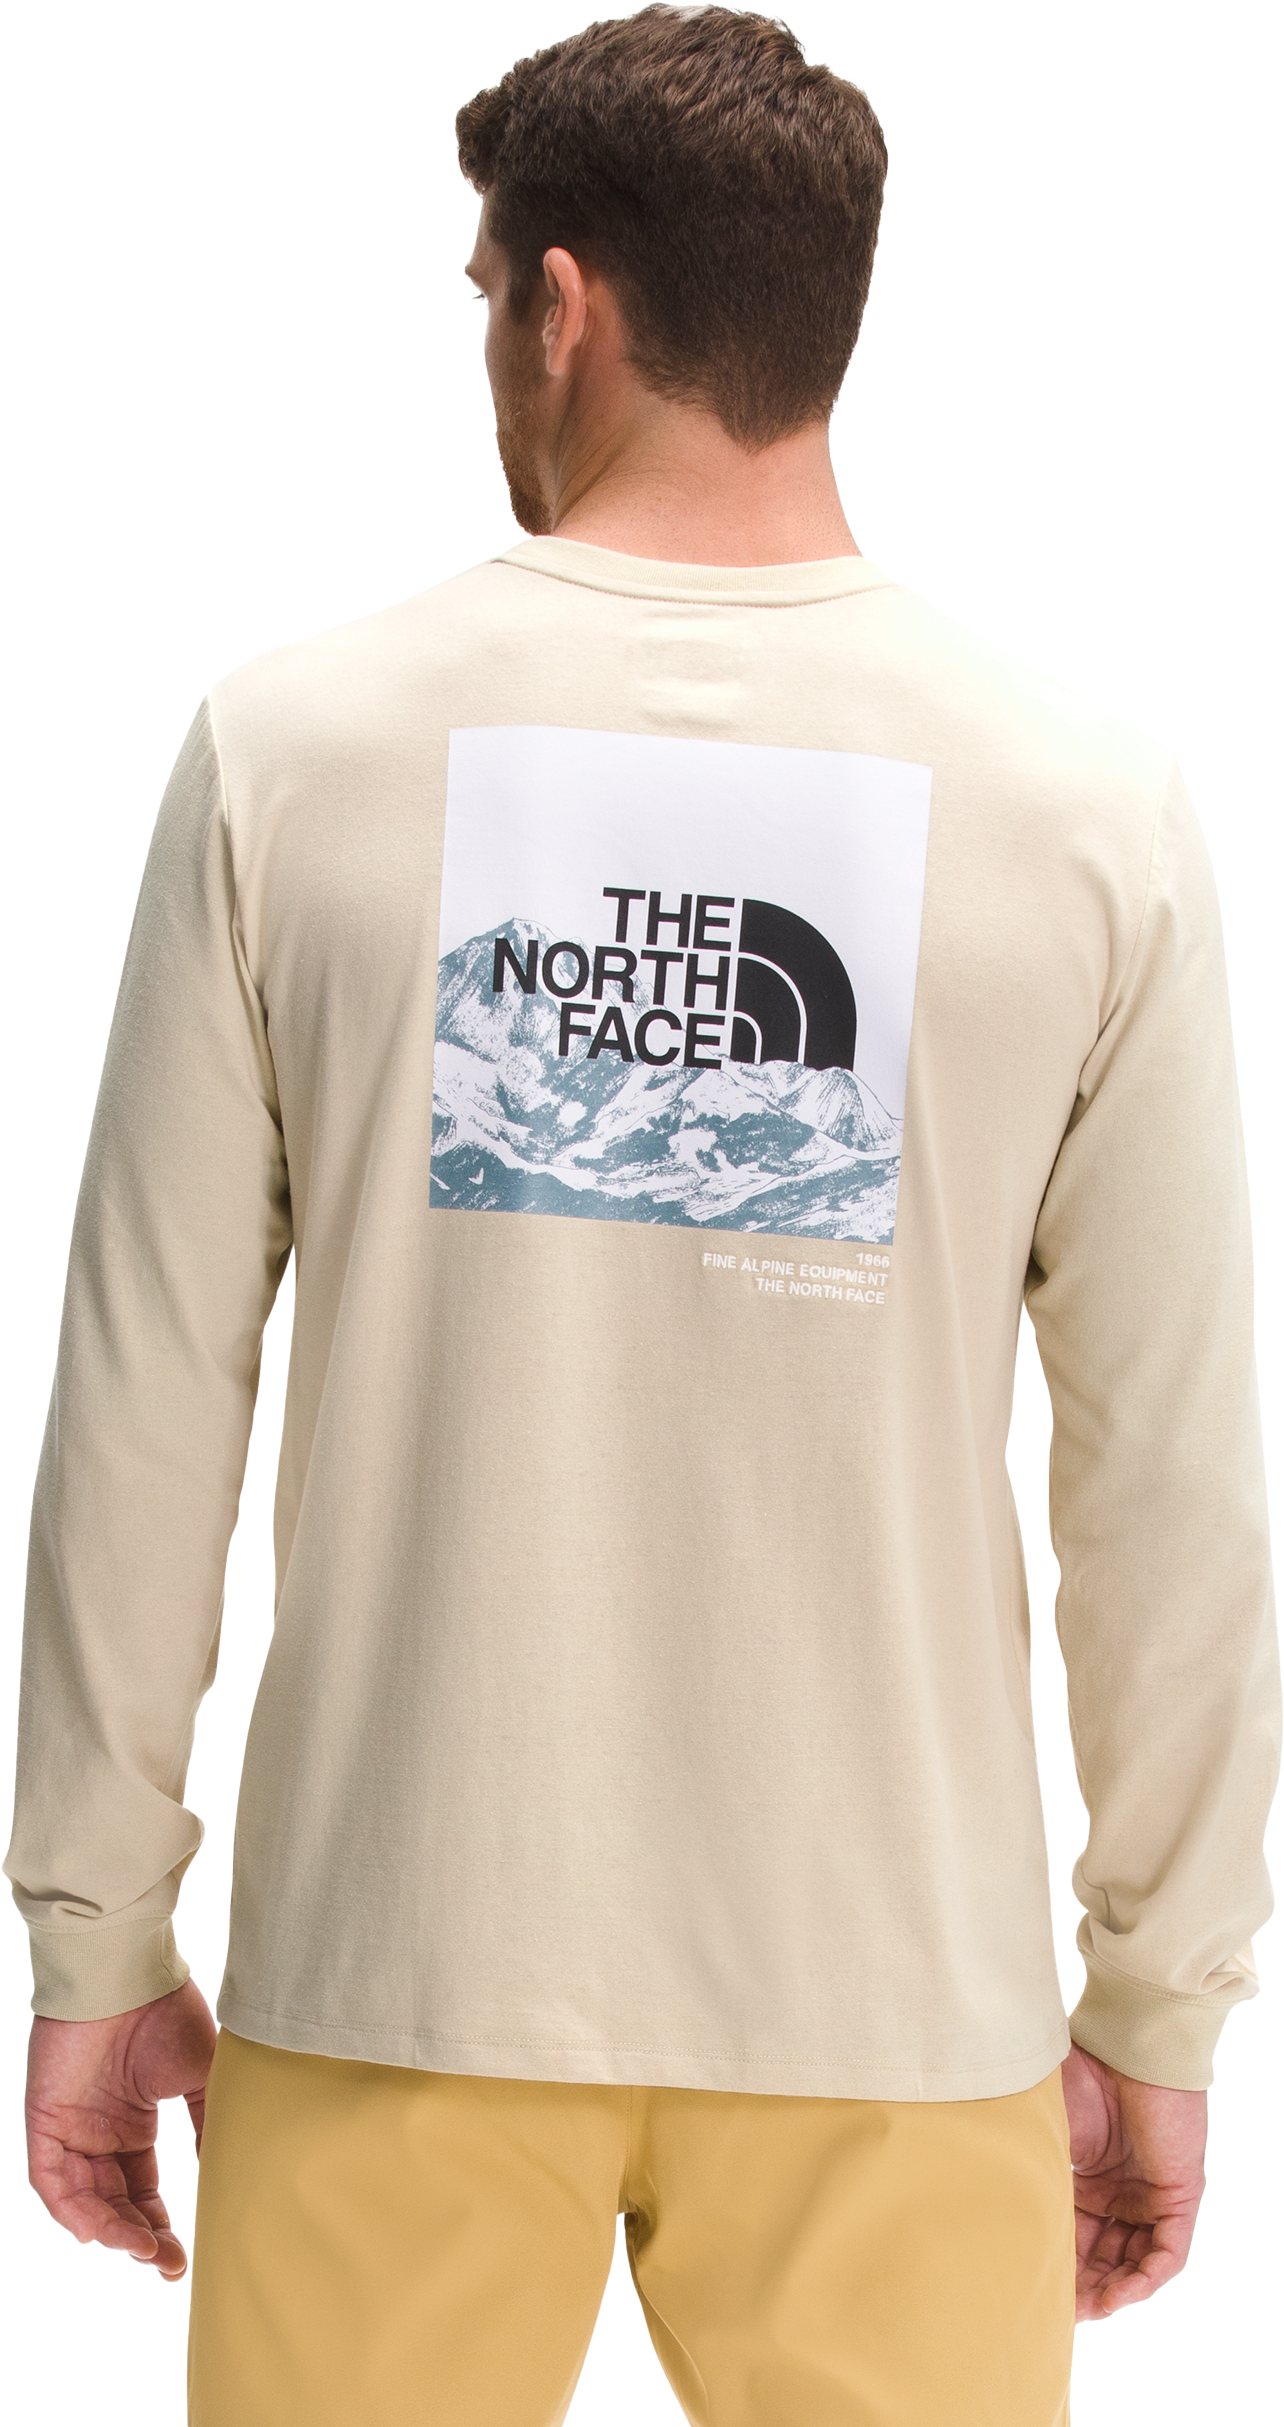 The North Face Logo Play Long-Sleeve T-Shirt for Men - Gravel - XL